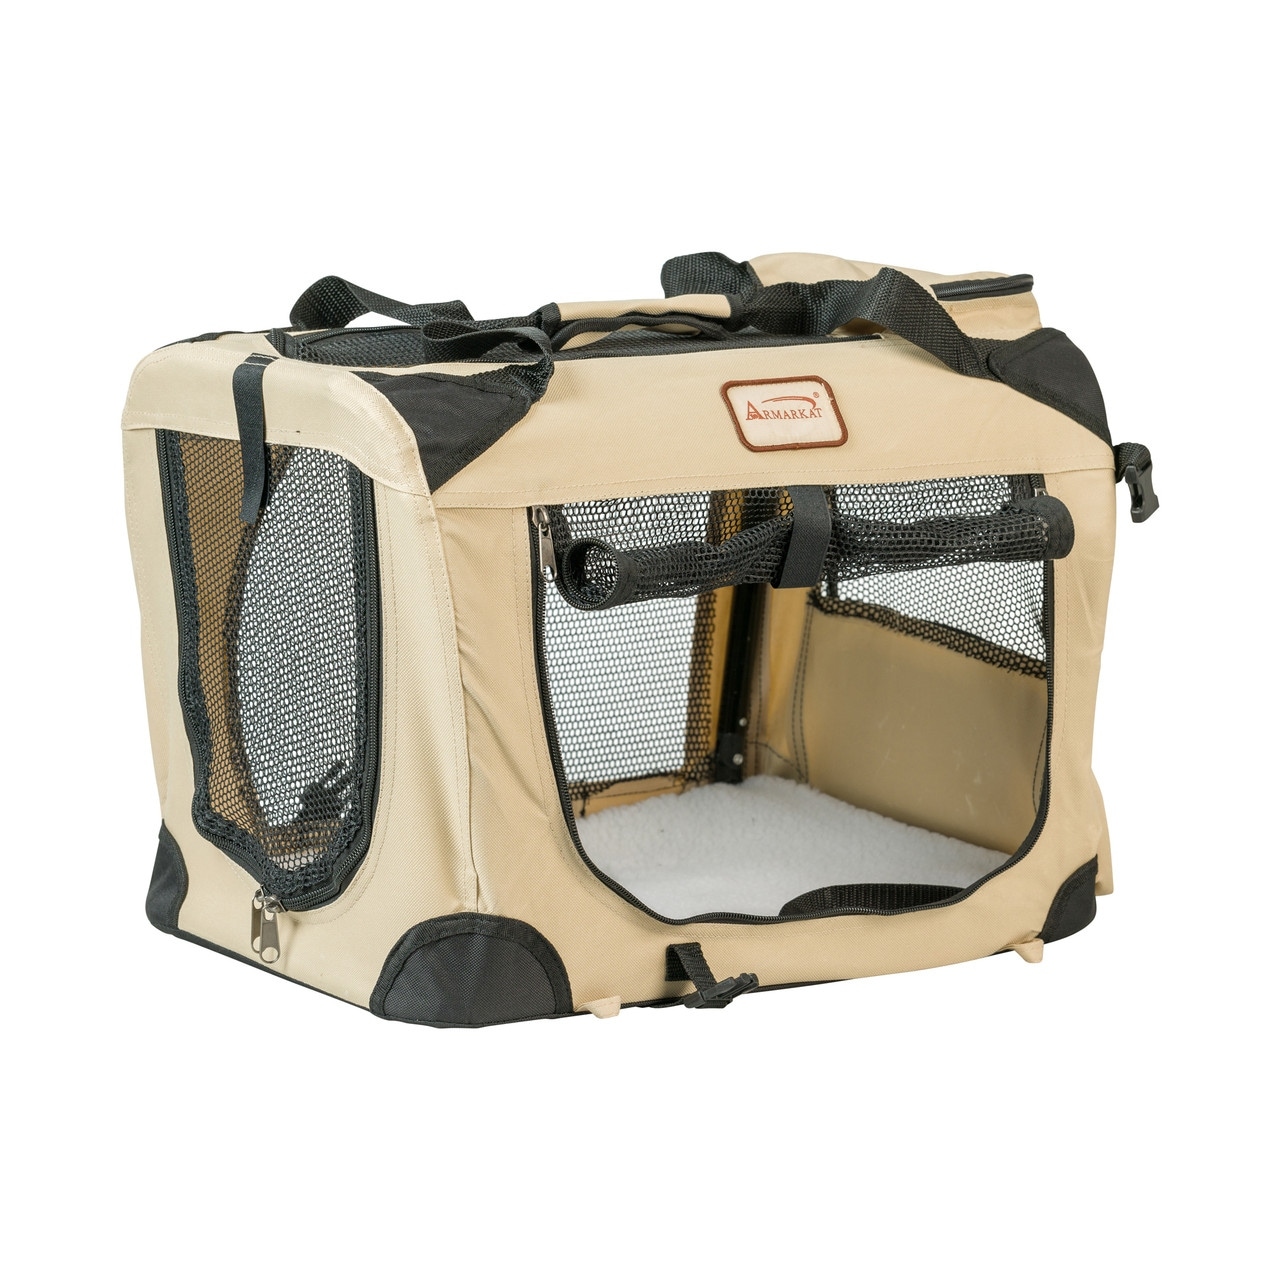 FoldIng Soft Dog Crate for Dogs and Cats, Pet Travel Carrier - 20L x 14W  x 14H